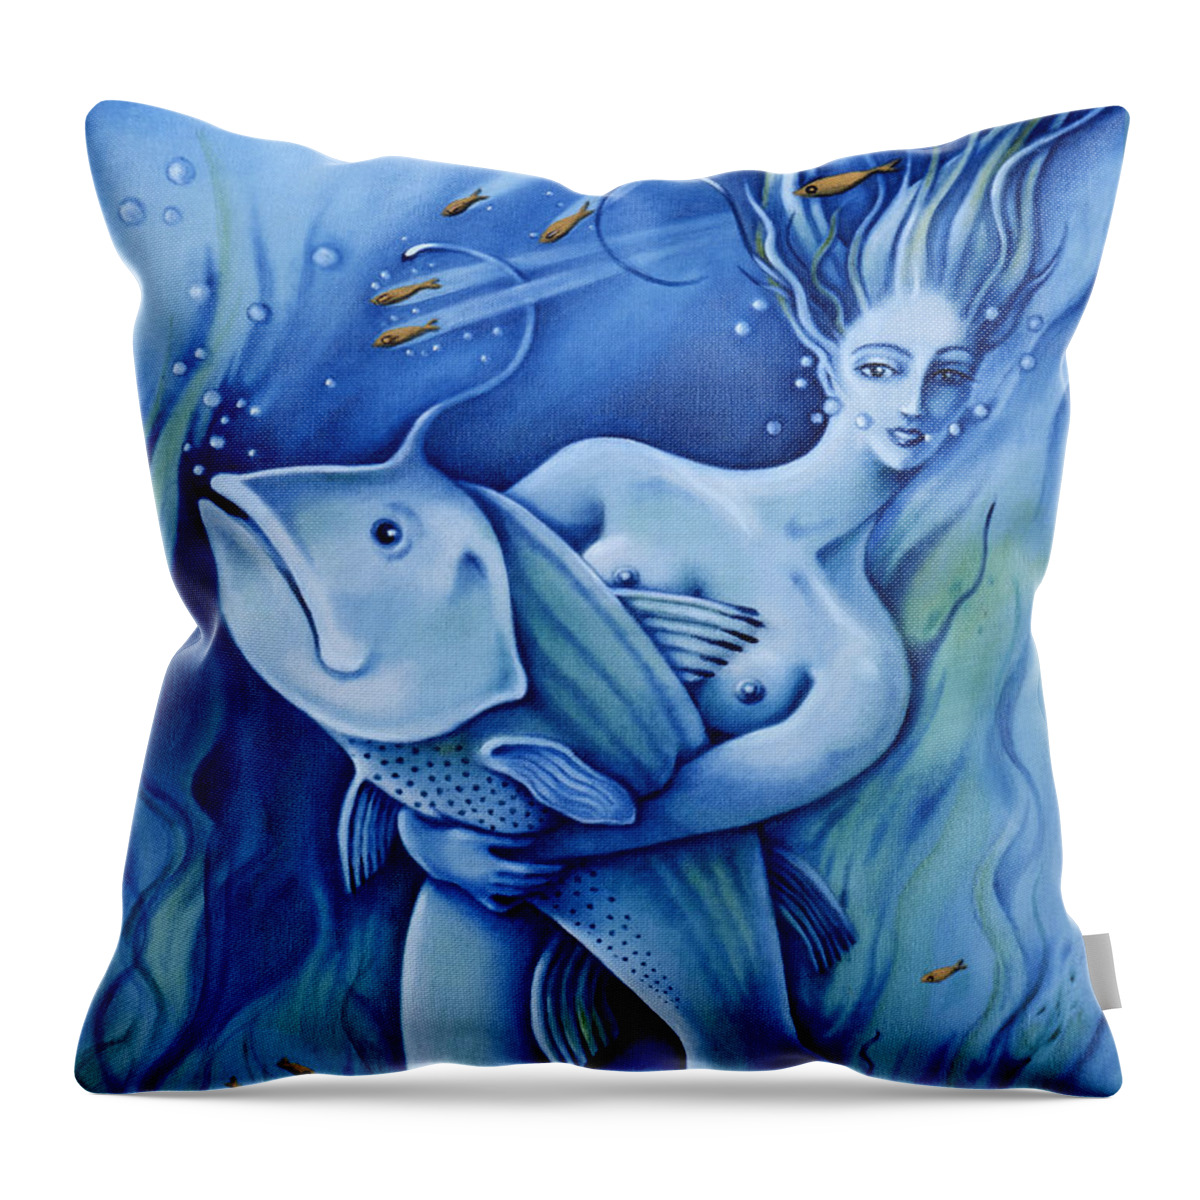 Fantasy Throw Pillow featuring the painting Water by Valerie White